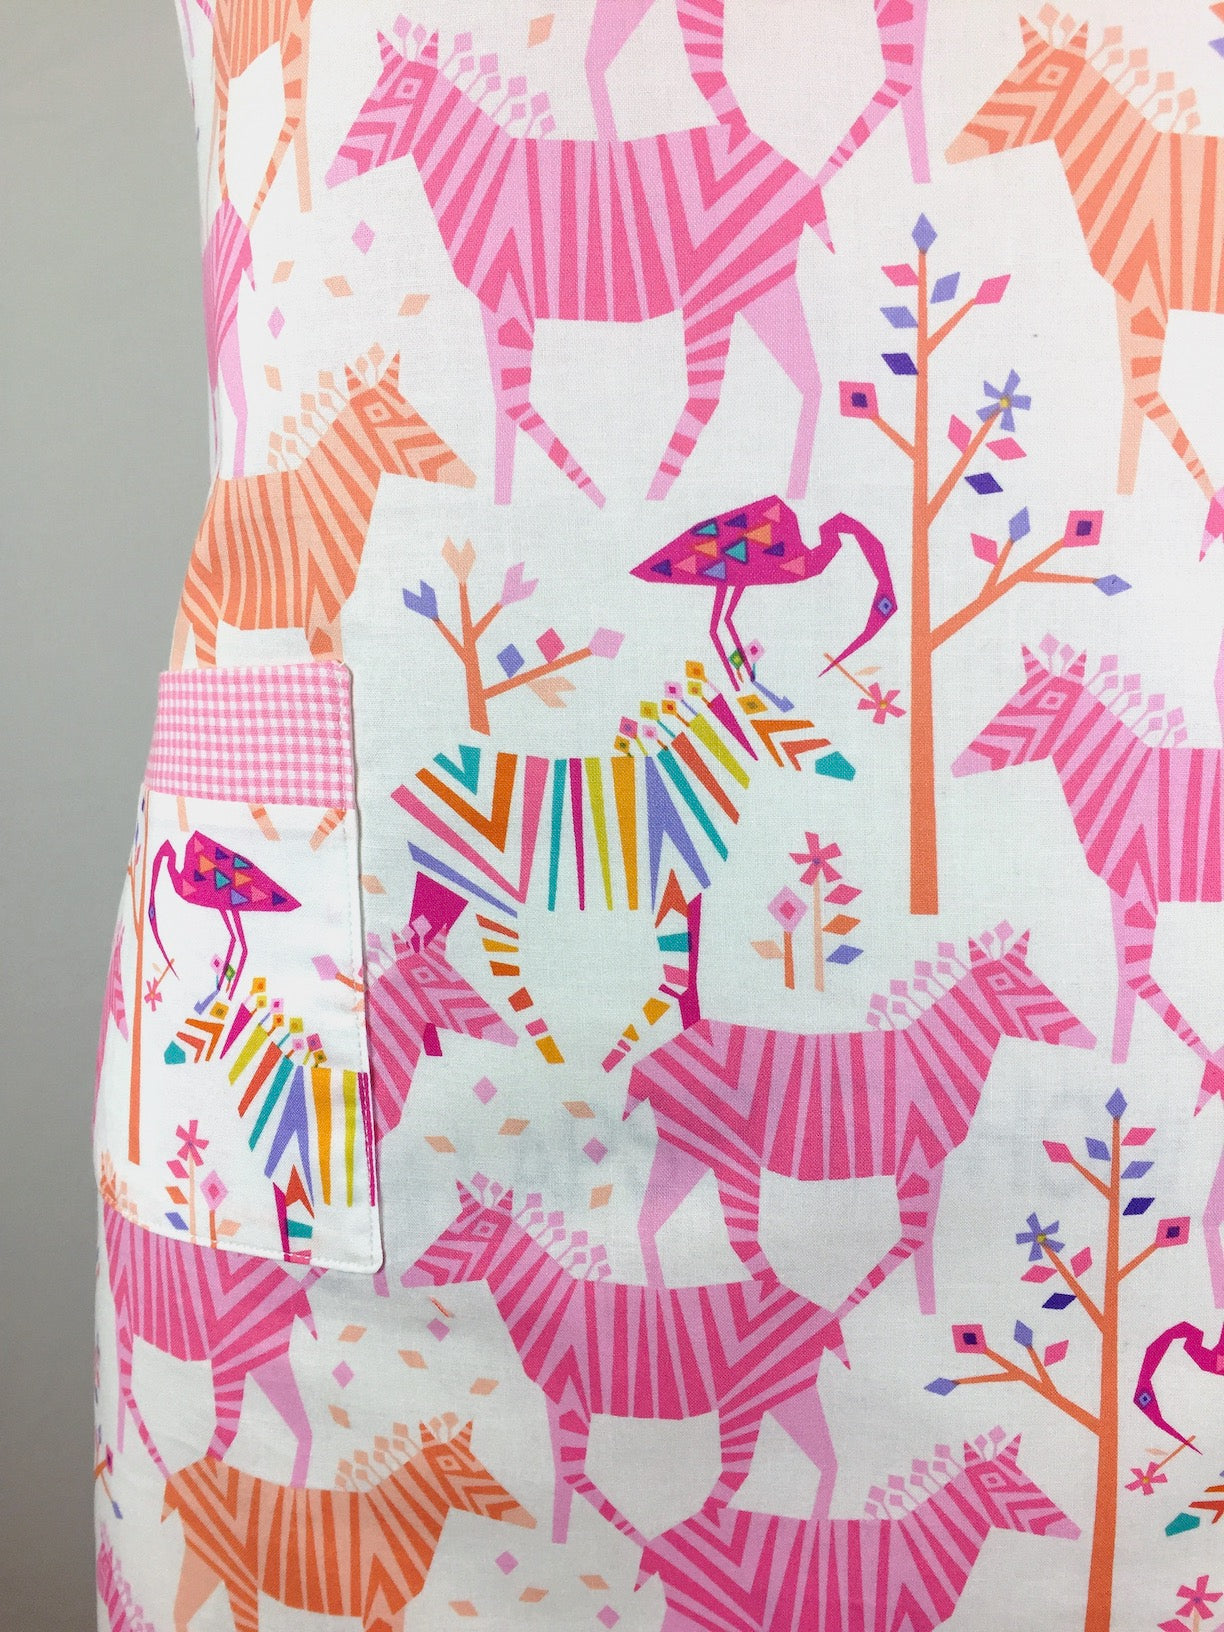 Rainbow Zebra Apron-The Blue Peony-Age Group_Adult,Animal_Zebra,Apron Style_Chef,Category_Apron,Color_Pink,Department_Kitchen,Material_Cotton,Pattern_Graphic,Theme_Animal